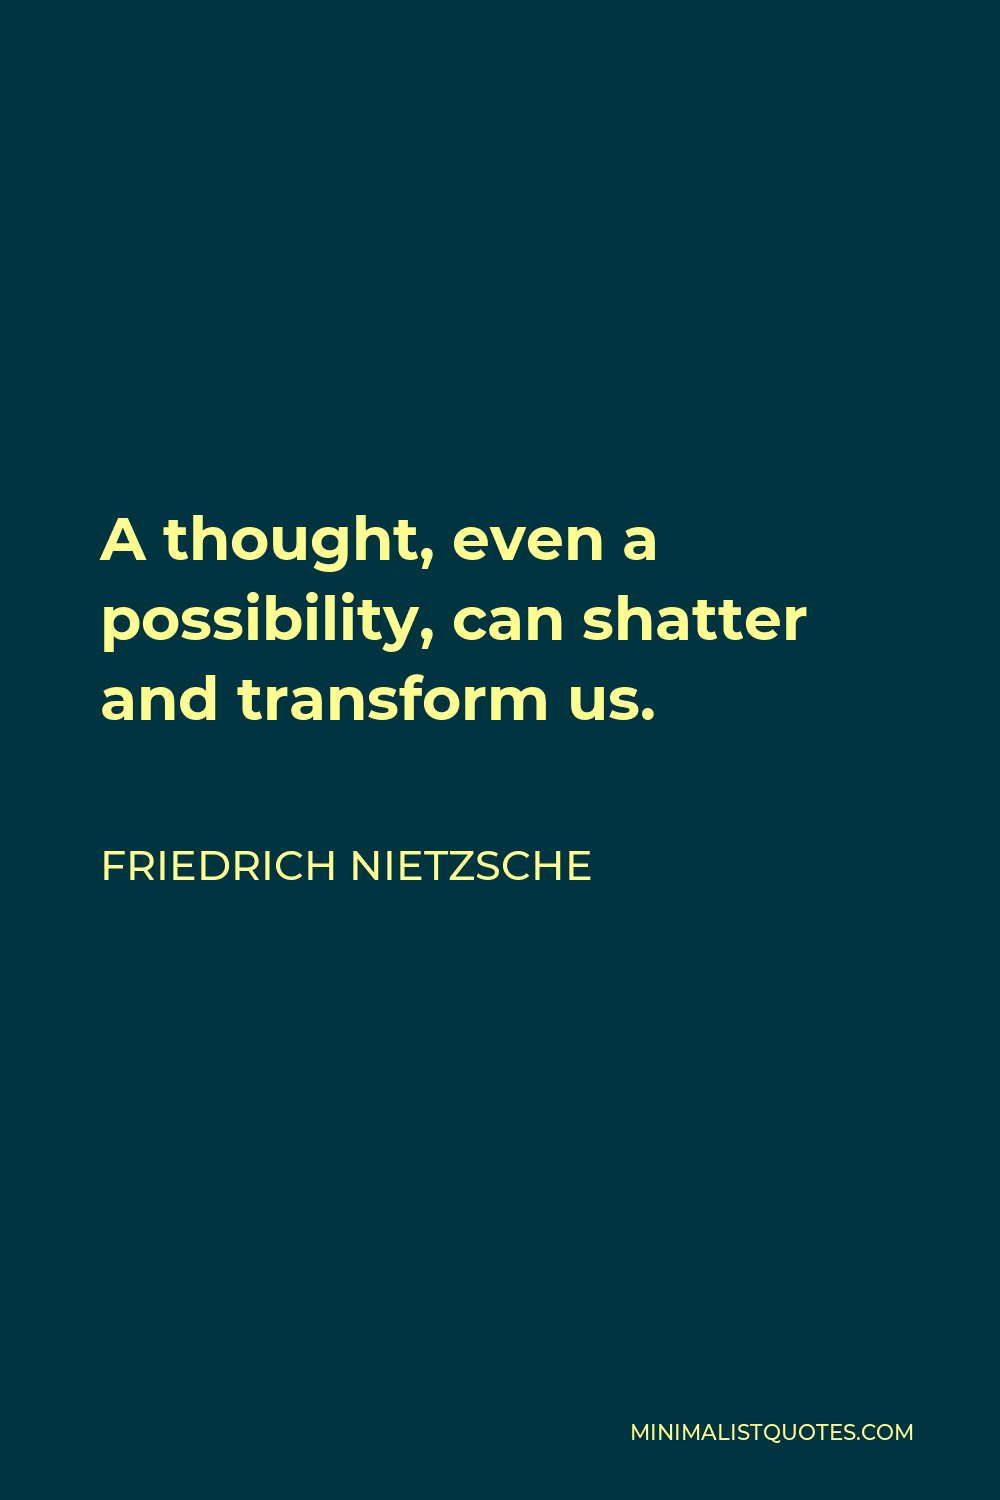 Friedrich Nietzsche Quote - A thought, even a possibility, can shatter and transform us.